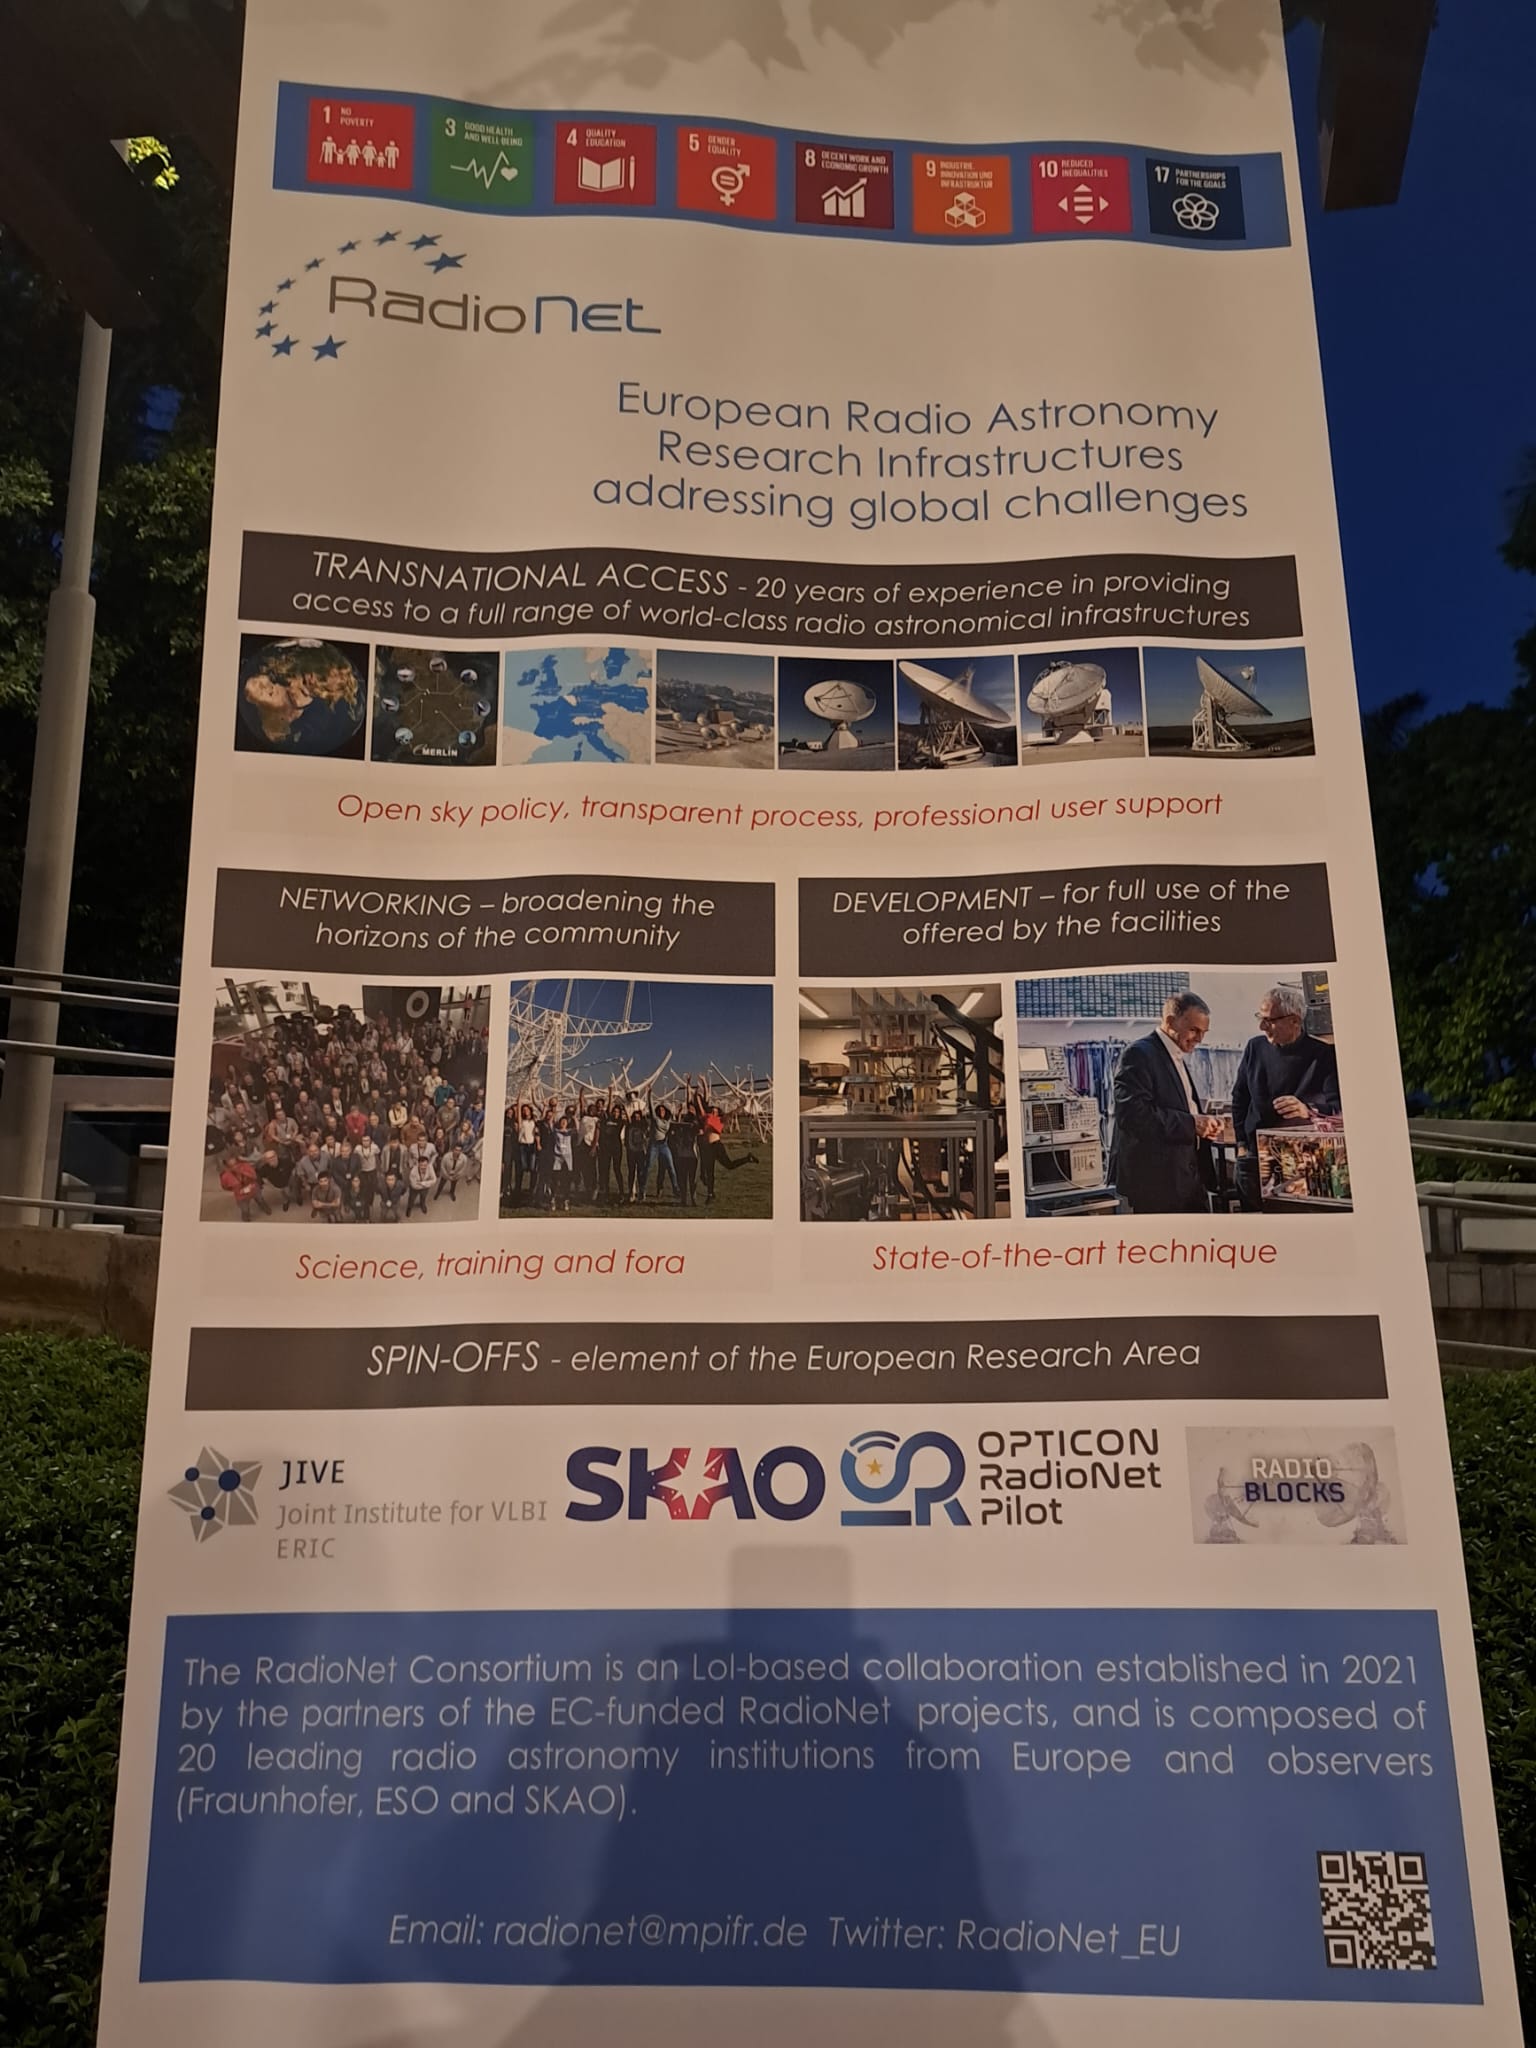 The roll-up banner on the Radionet collaboration that Izabela Rottmann  prepared and which she presented together with Agnieszka Słowikowska at the conference “Global Dimension and Sustainability of Research Infrastructures” in Tenerife (25-26 Sep).   